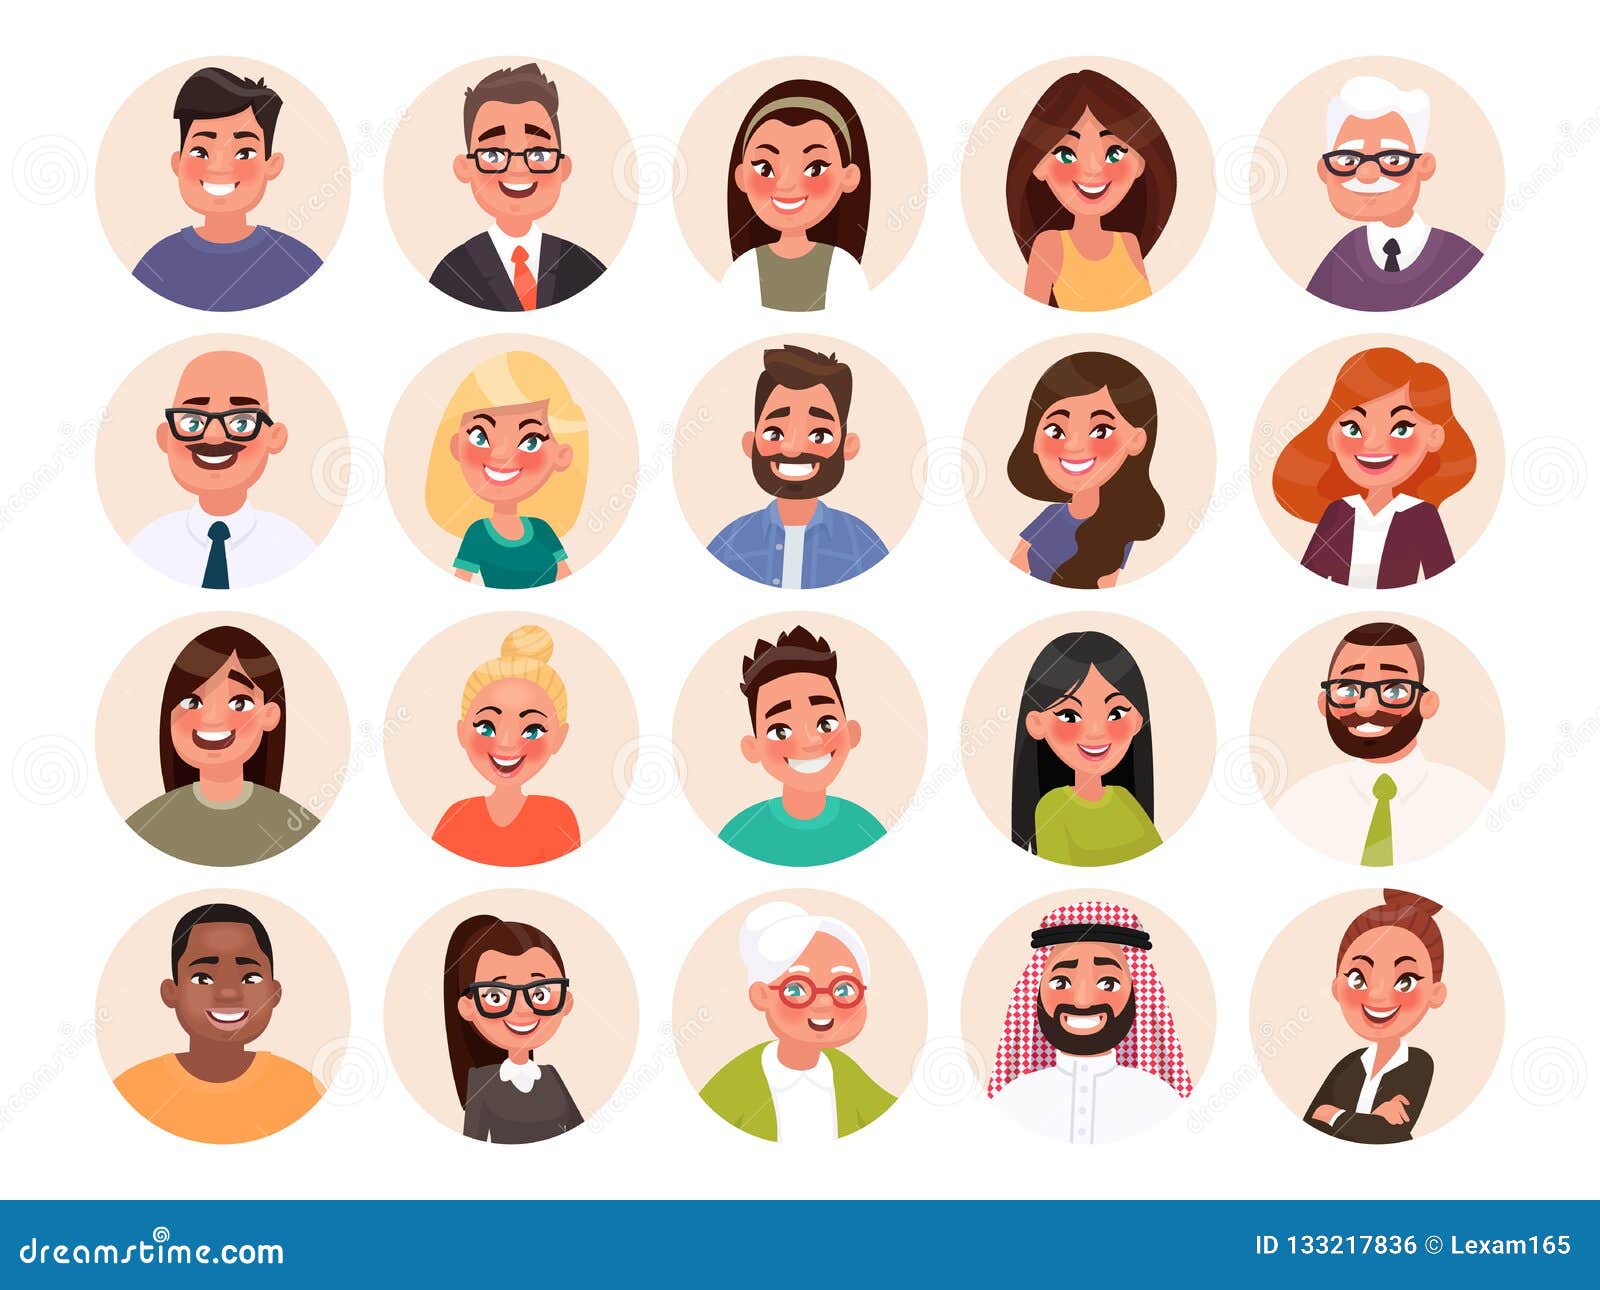 set of avatars of happy people of different races and age. portraits of men and women